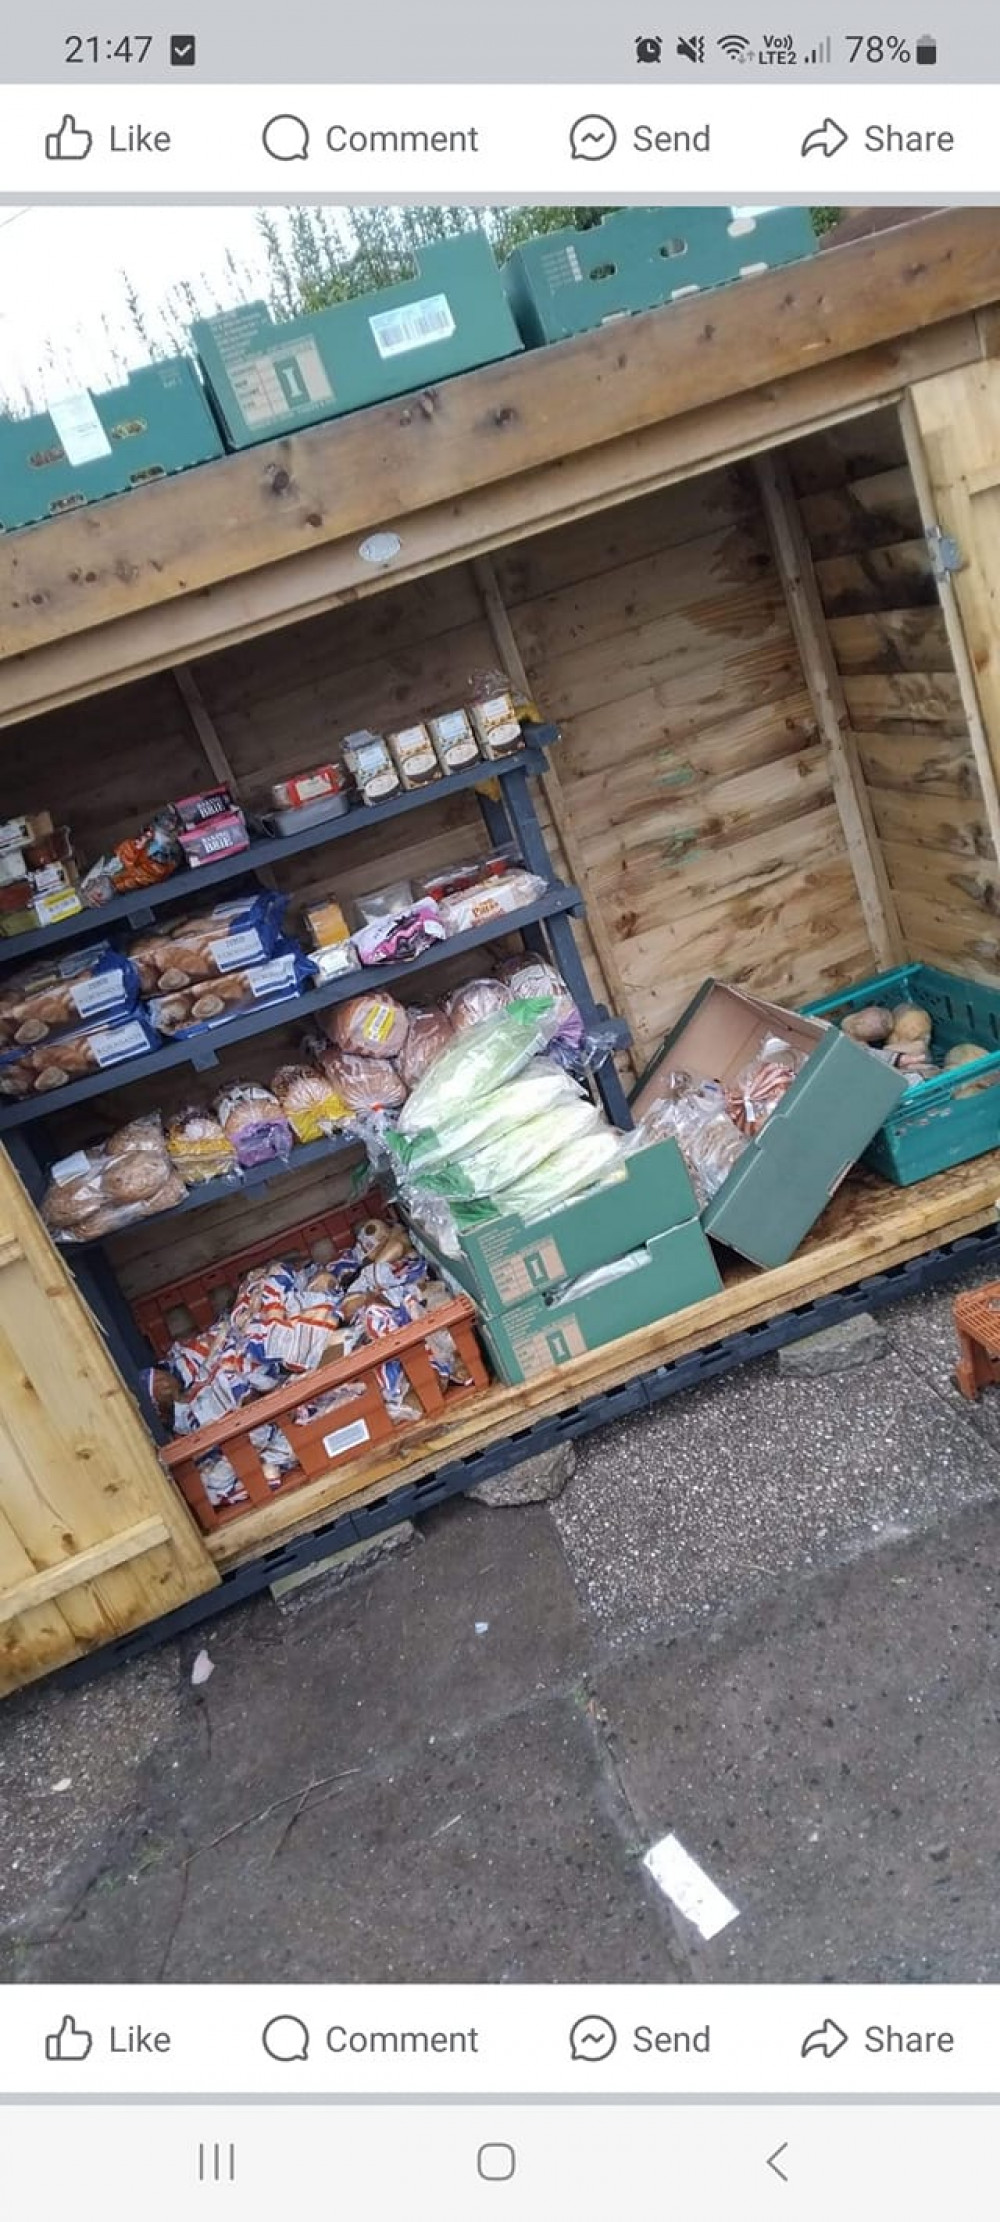 A JustGiving page has been launched to buy an emergency shop for families waiting for the food bank. (Photo: The Alsager Shed)